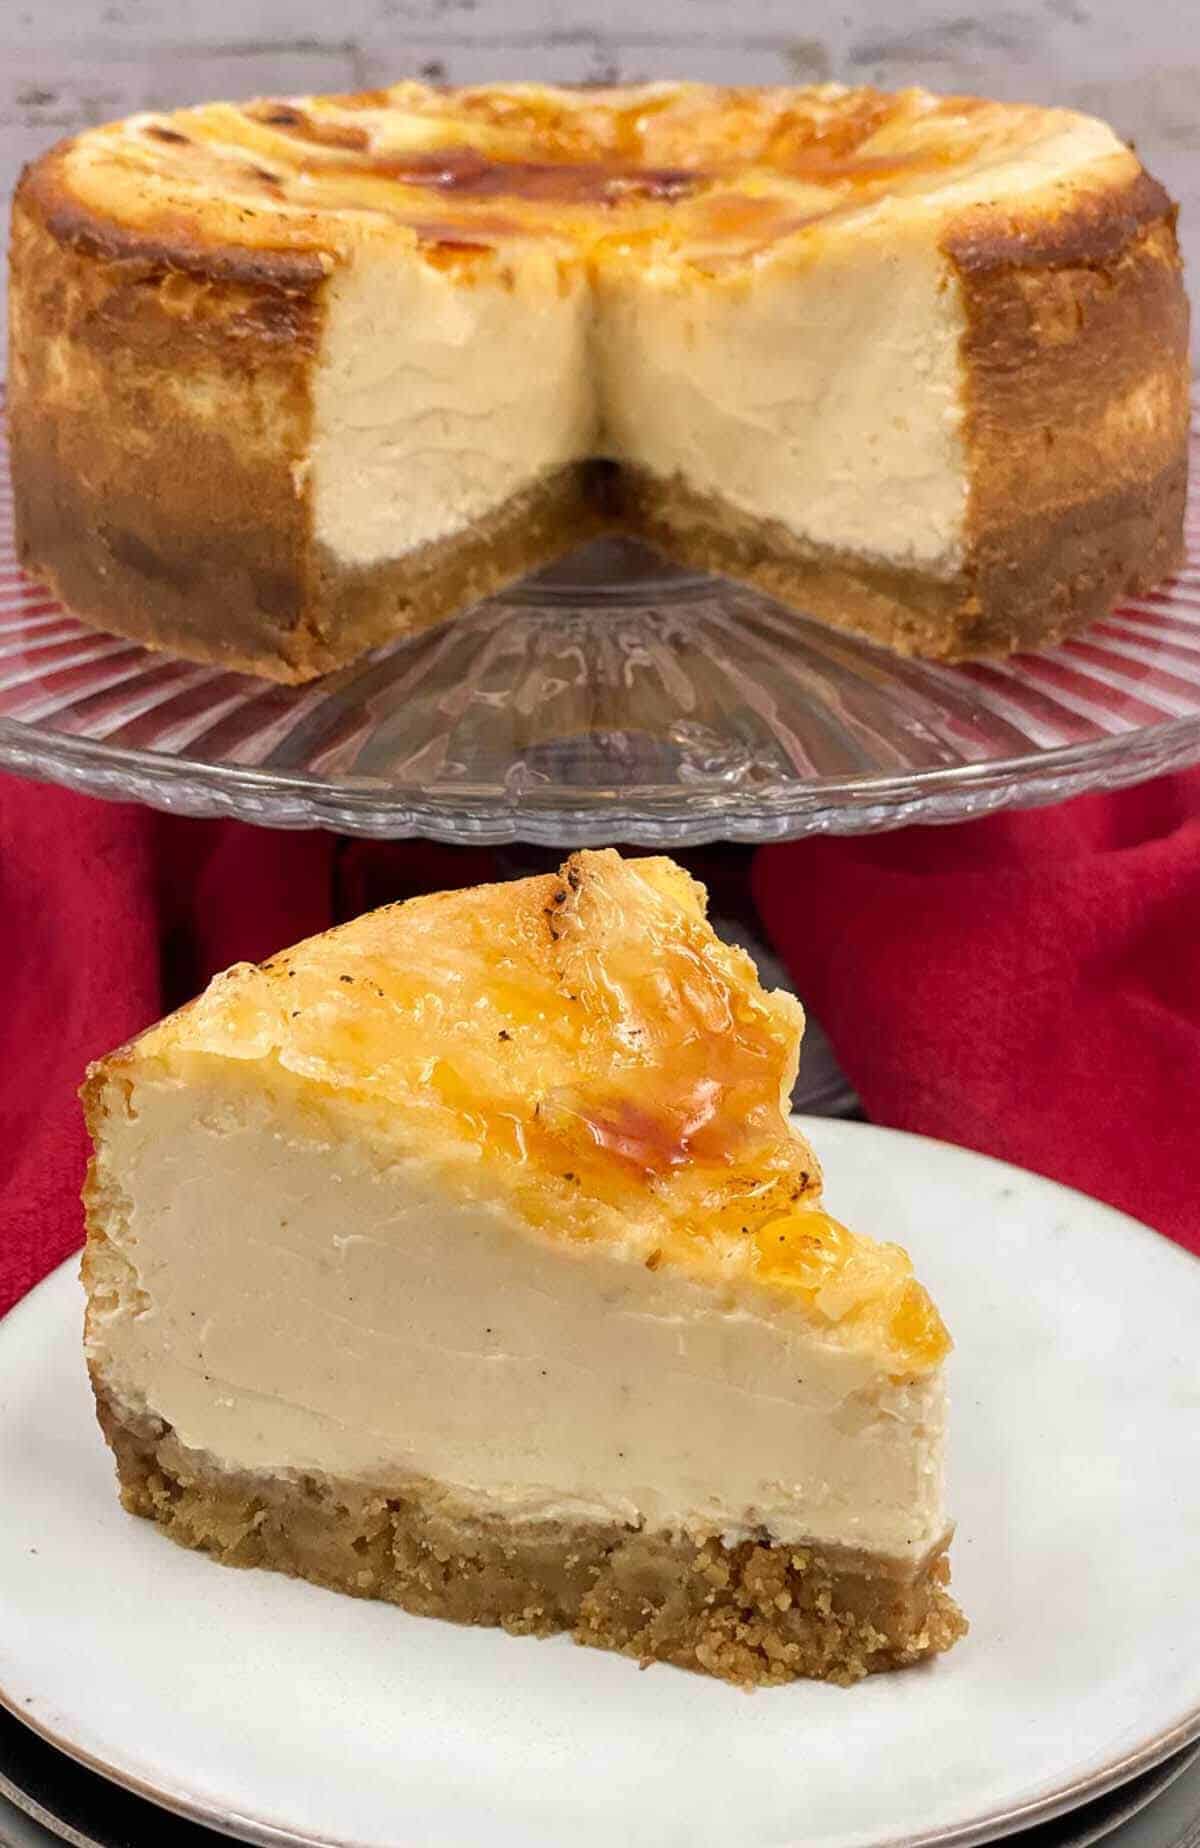 A slice of cheesecake made in creme brulee style and the cake it's come from on a stand behind.